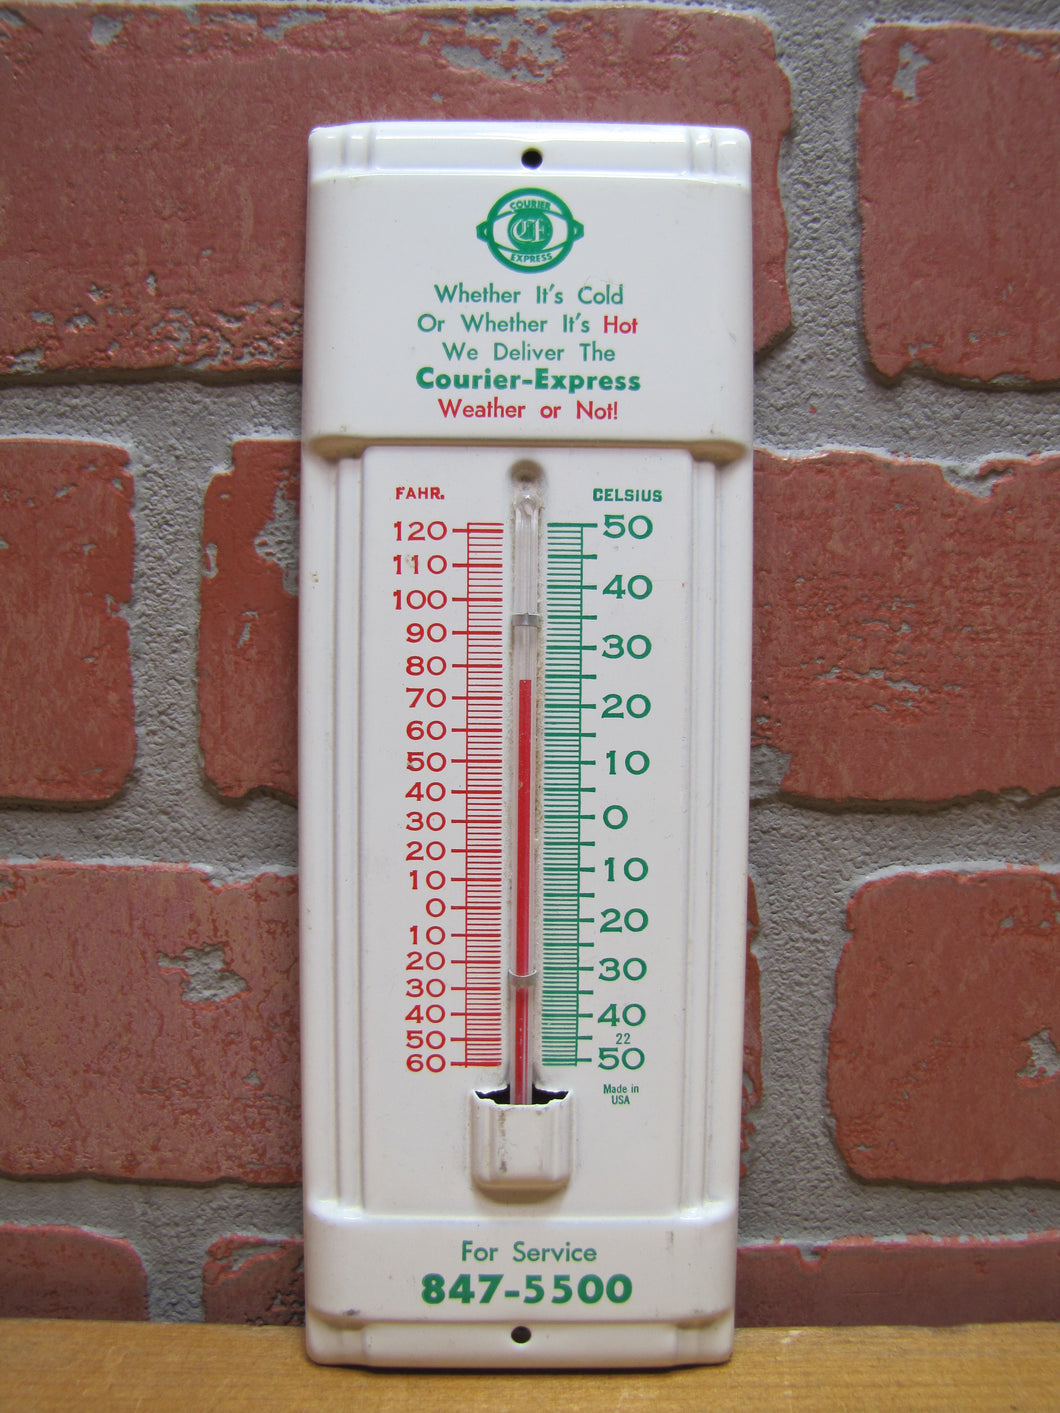 COURIER-EXPRESS Vintage Metal Newspaper Advertising Thermometer Sign BUFFALO NY